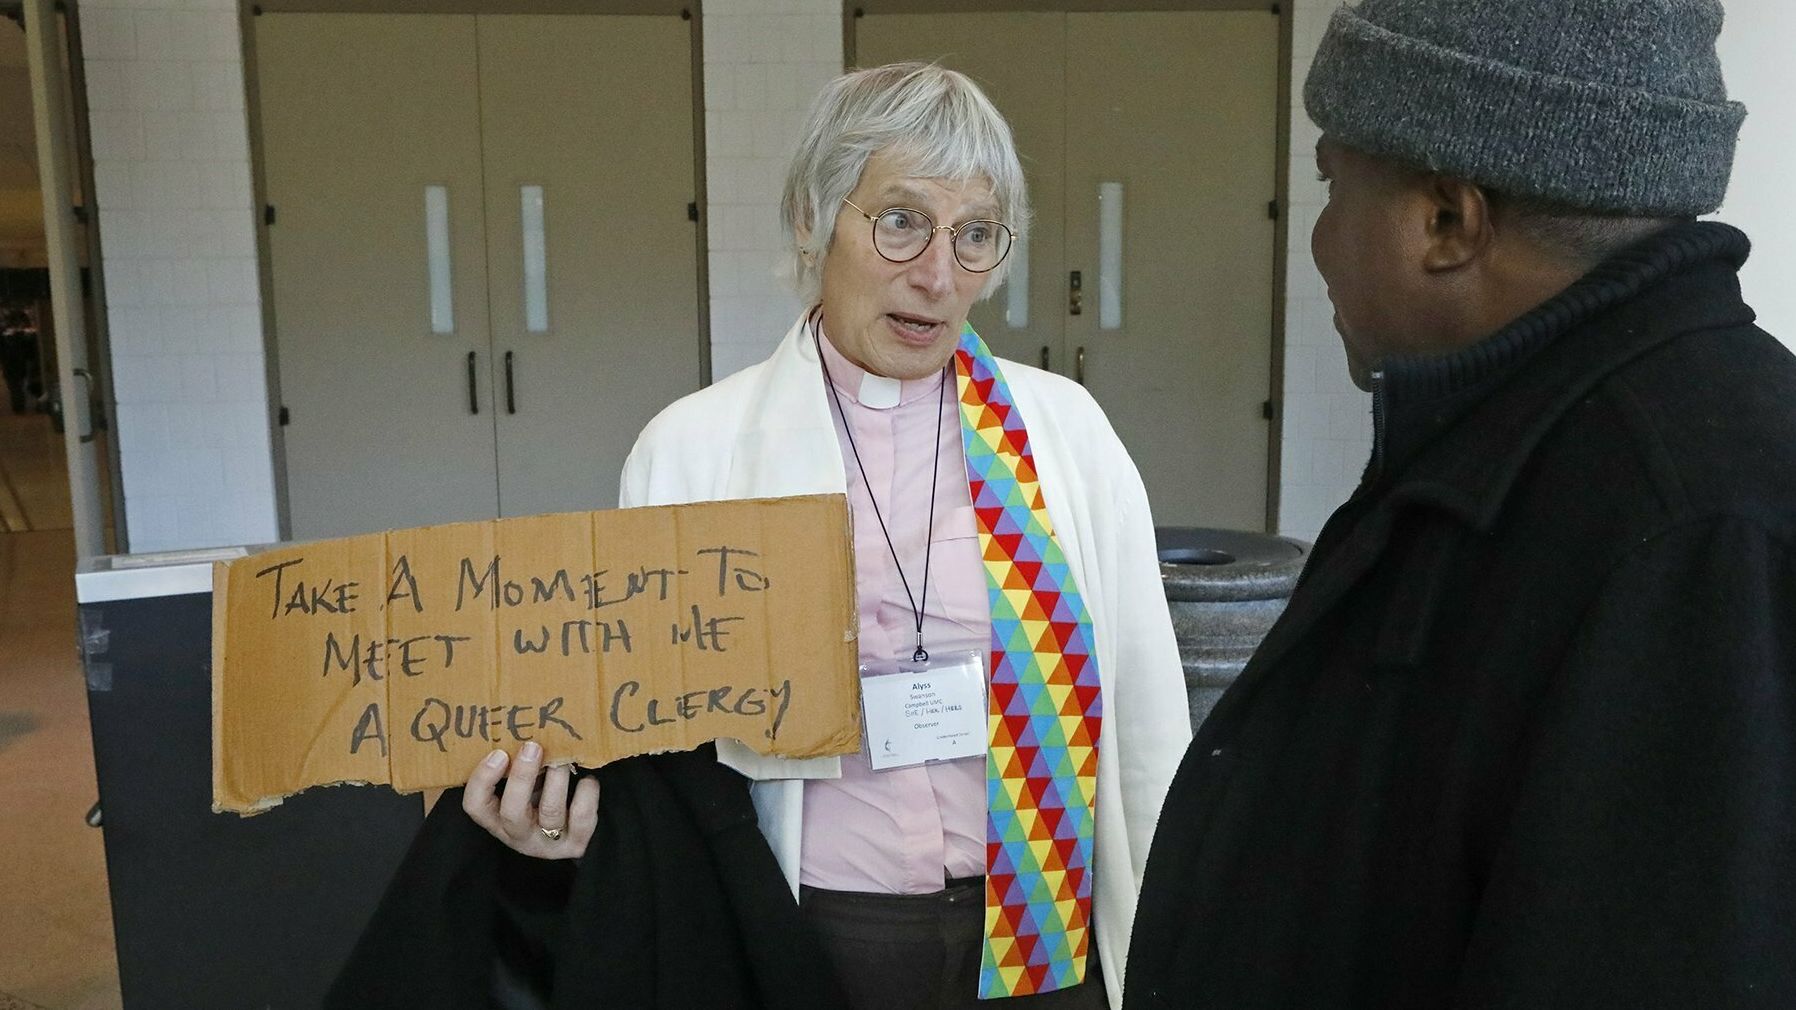 Alyss Swanson, a transgender United Methodist deacon from California, speaks with Bishop Samuel Quire of Liberia during the General Conference of the United Methodist Church in February 2019.